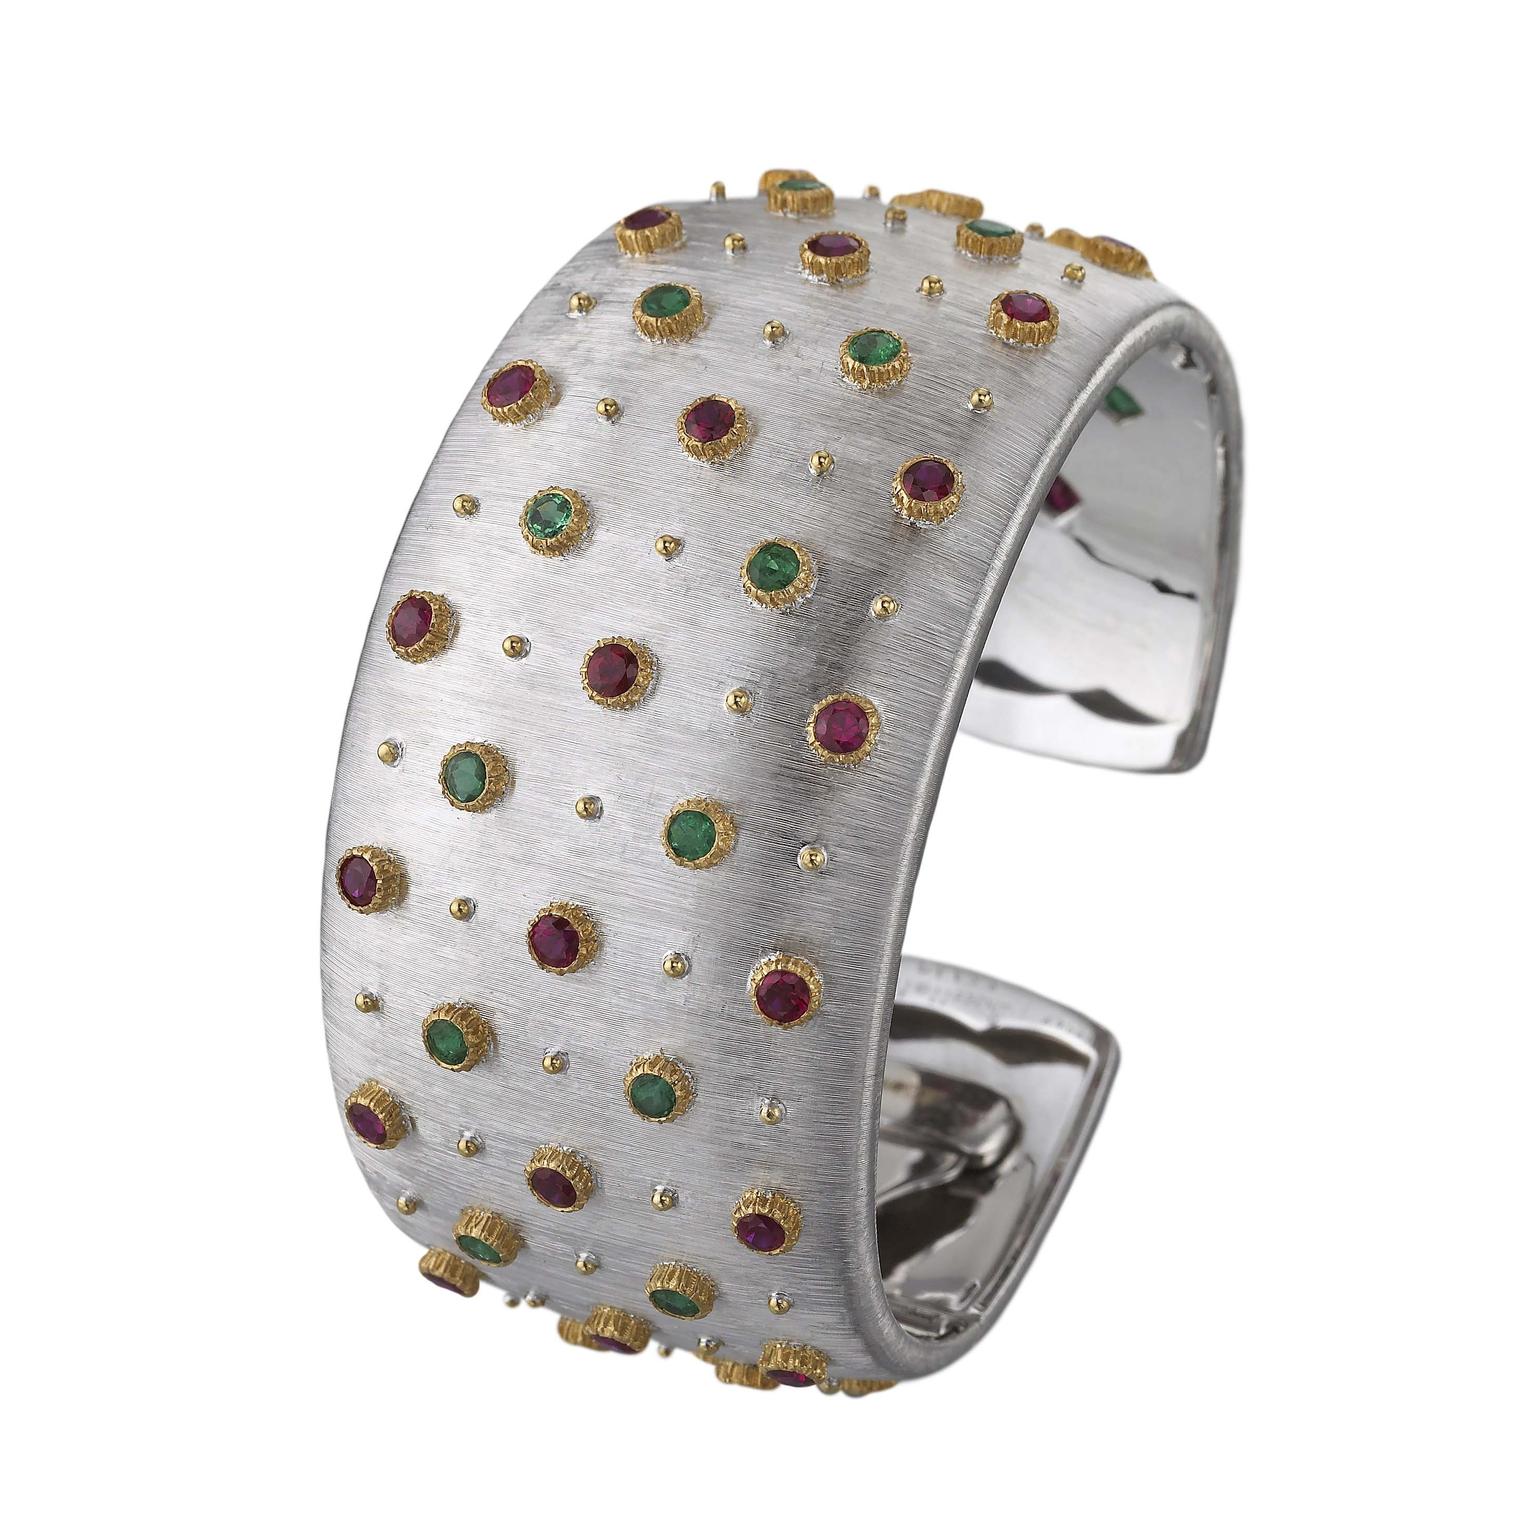 Buccellati cuff bracelet with emeralds, rubies and diamonds, engraved to resemble silk using the "regato" effect.